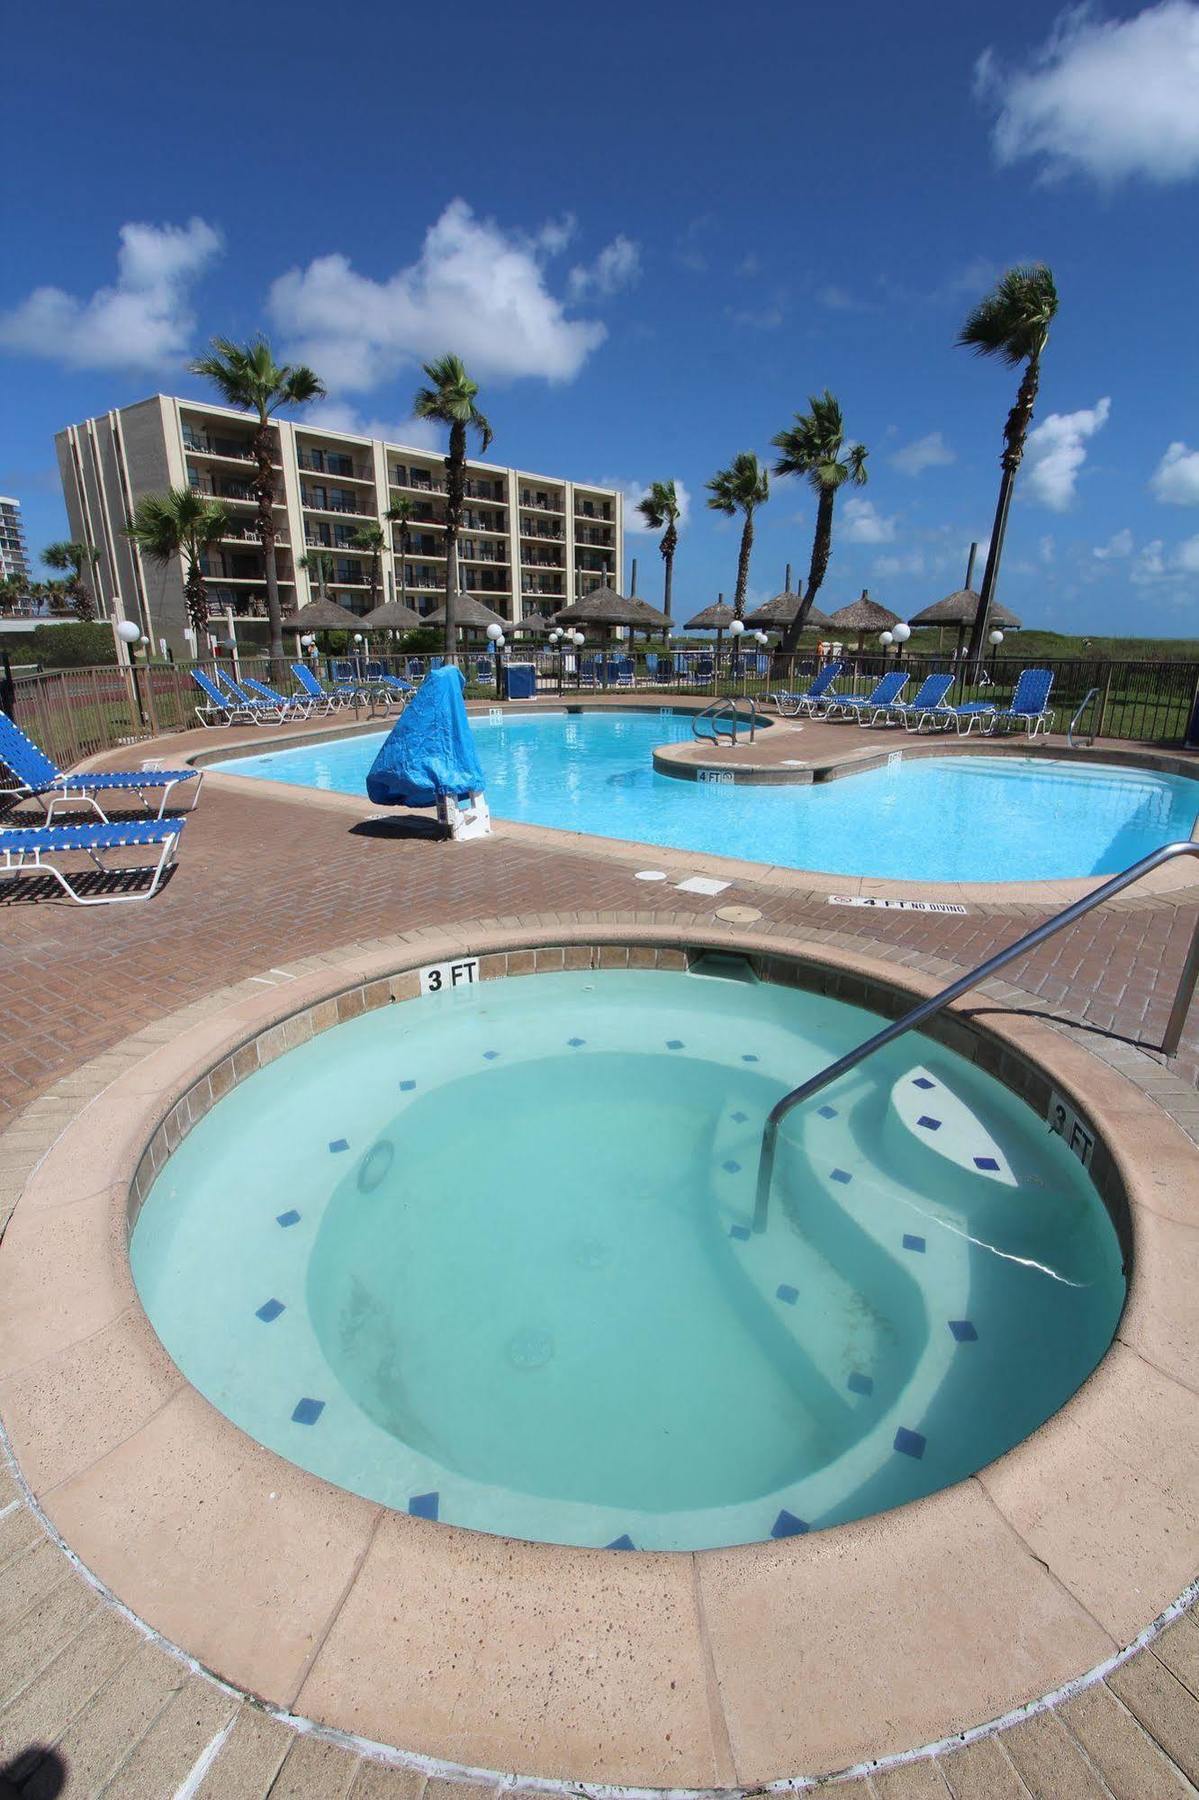 HOTEL ROYALE BEACH AND TENNIS CLUB, A VRI RESORT SOUTH PADRE ISLAND, TX 4*  (United States) - from US$ 152 | BOOKED